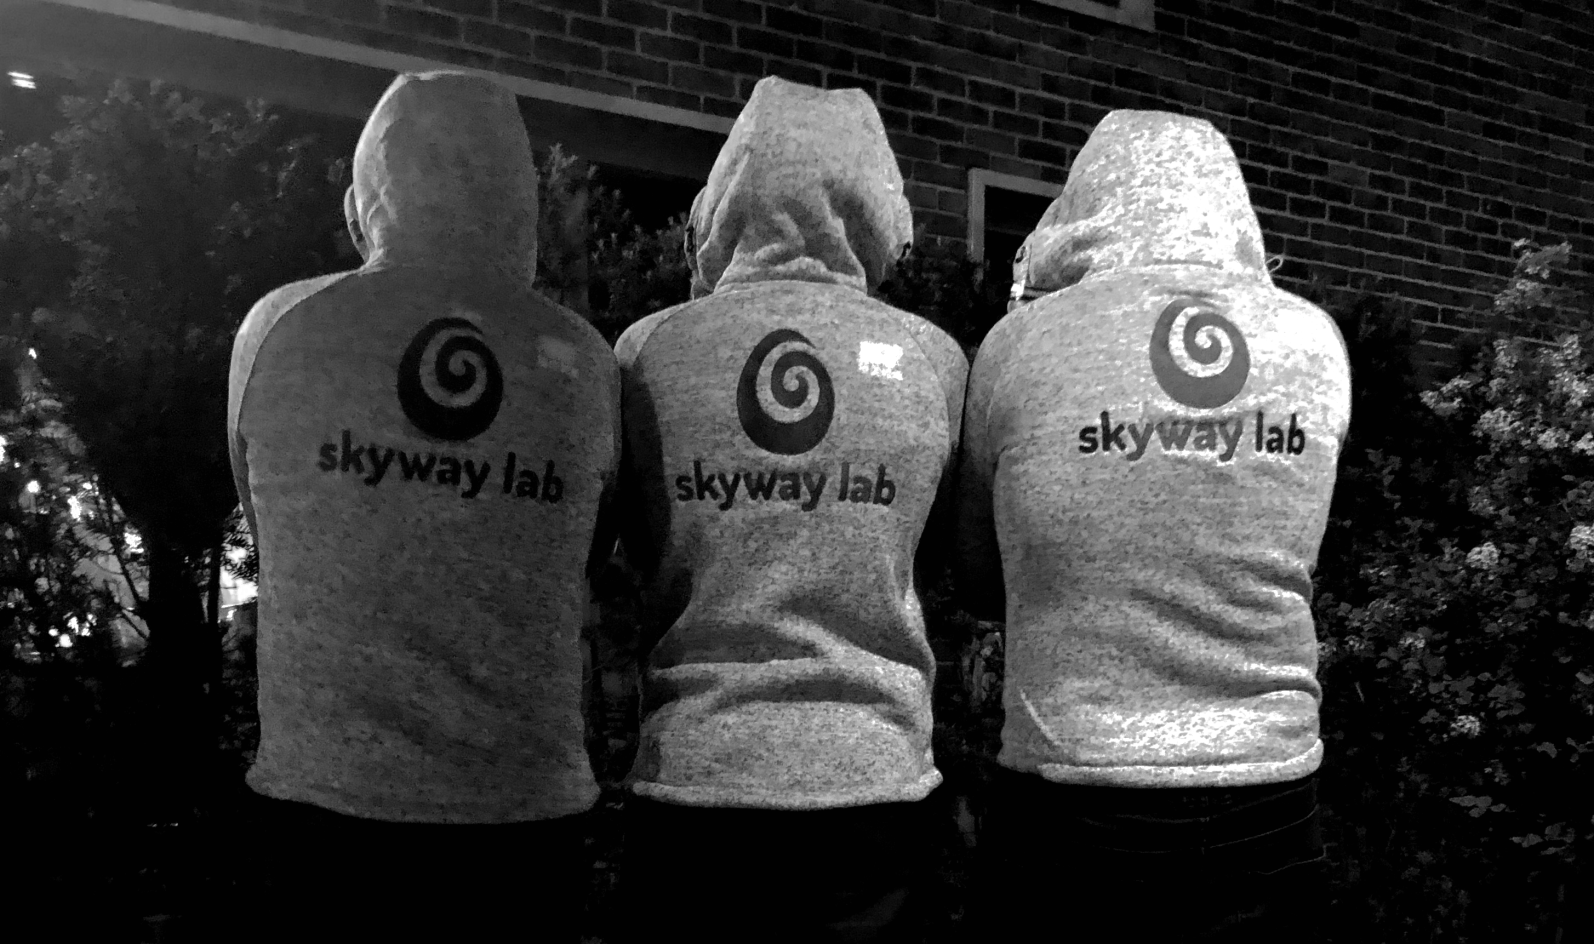 Skywaylab games video production